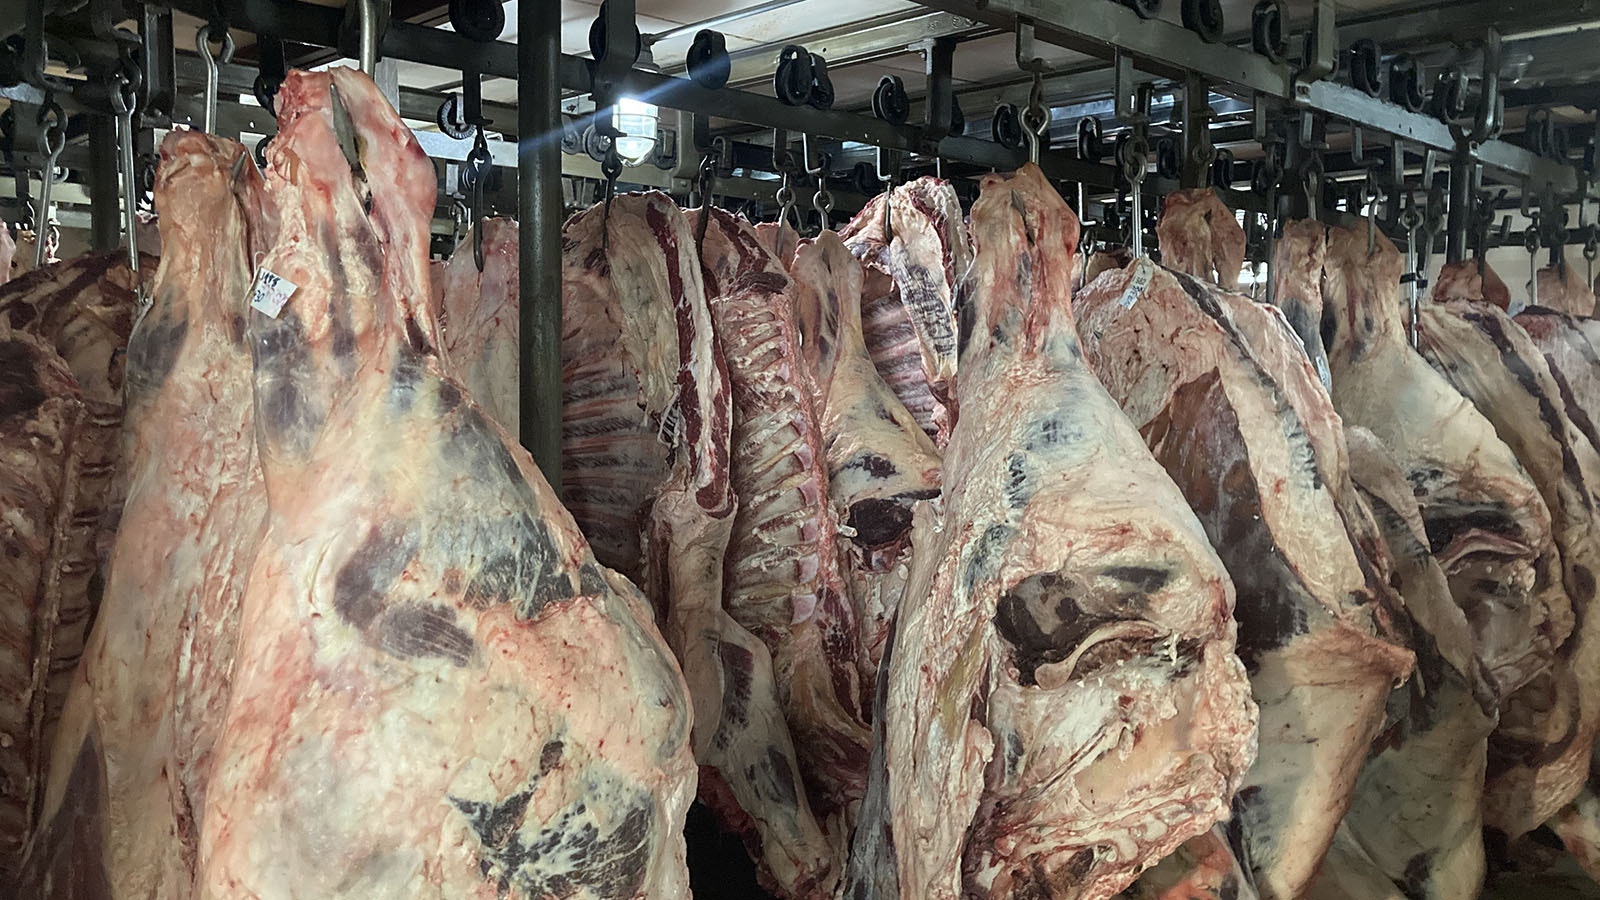 Beef, sheep, and goats, hanging in the meat locker at 307 Meat Processing in Mills, Wyoming.